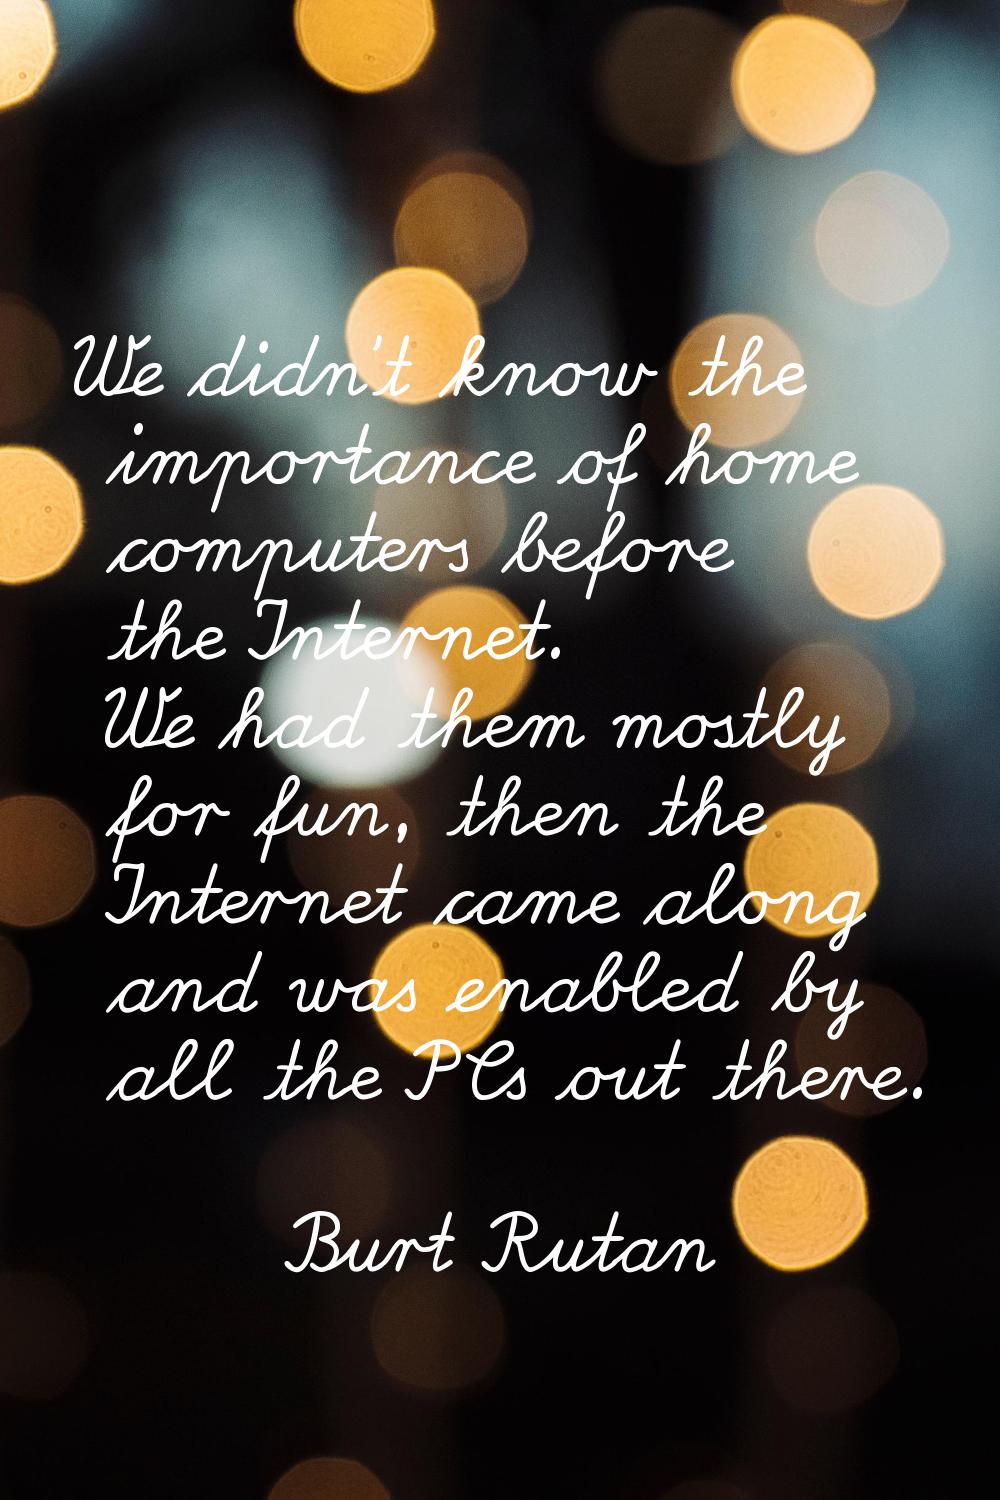 We didn't know the importance of home computers before the Internet. We had them mostly for fun, th